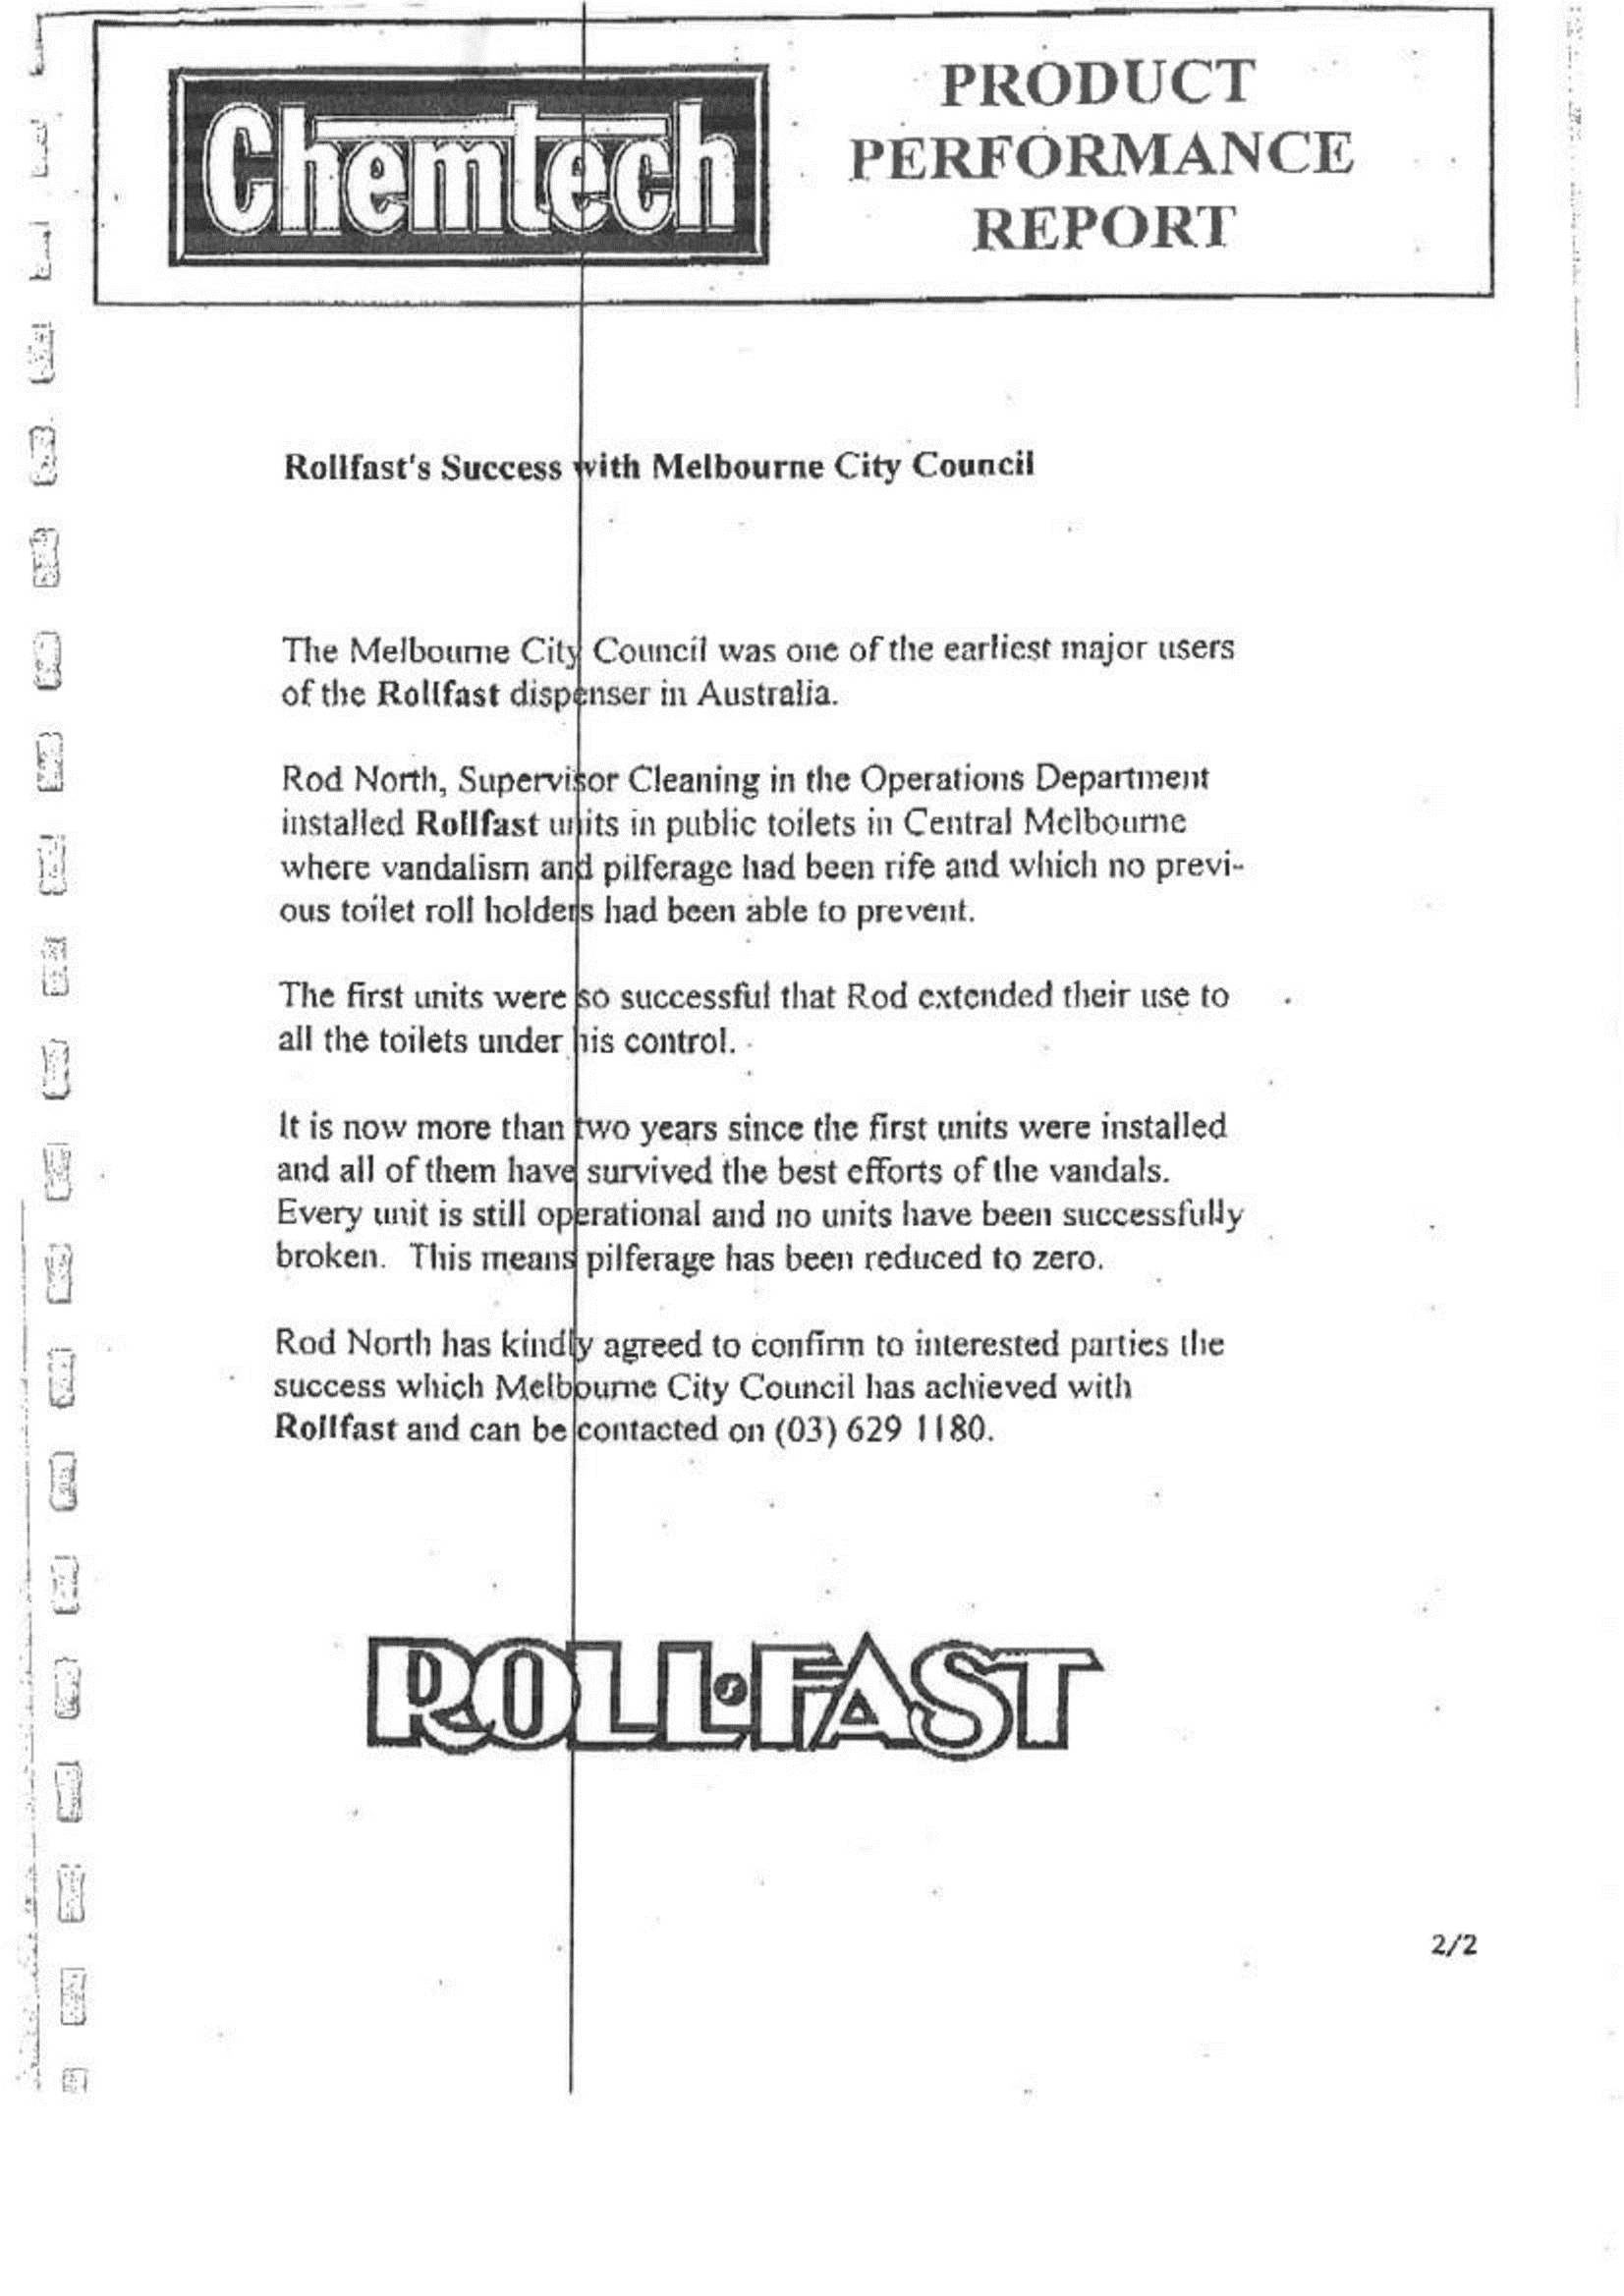 proof of concept rollfast document